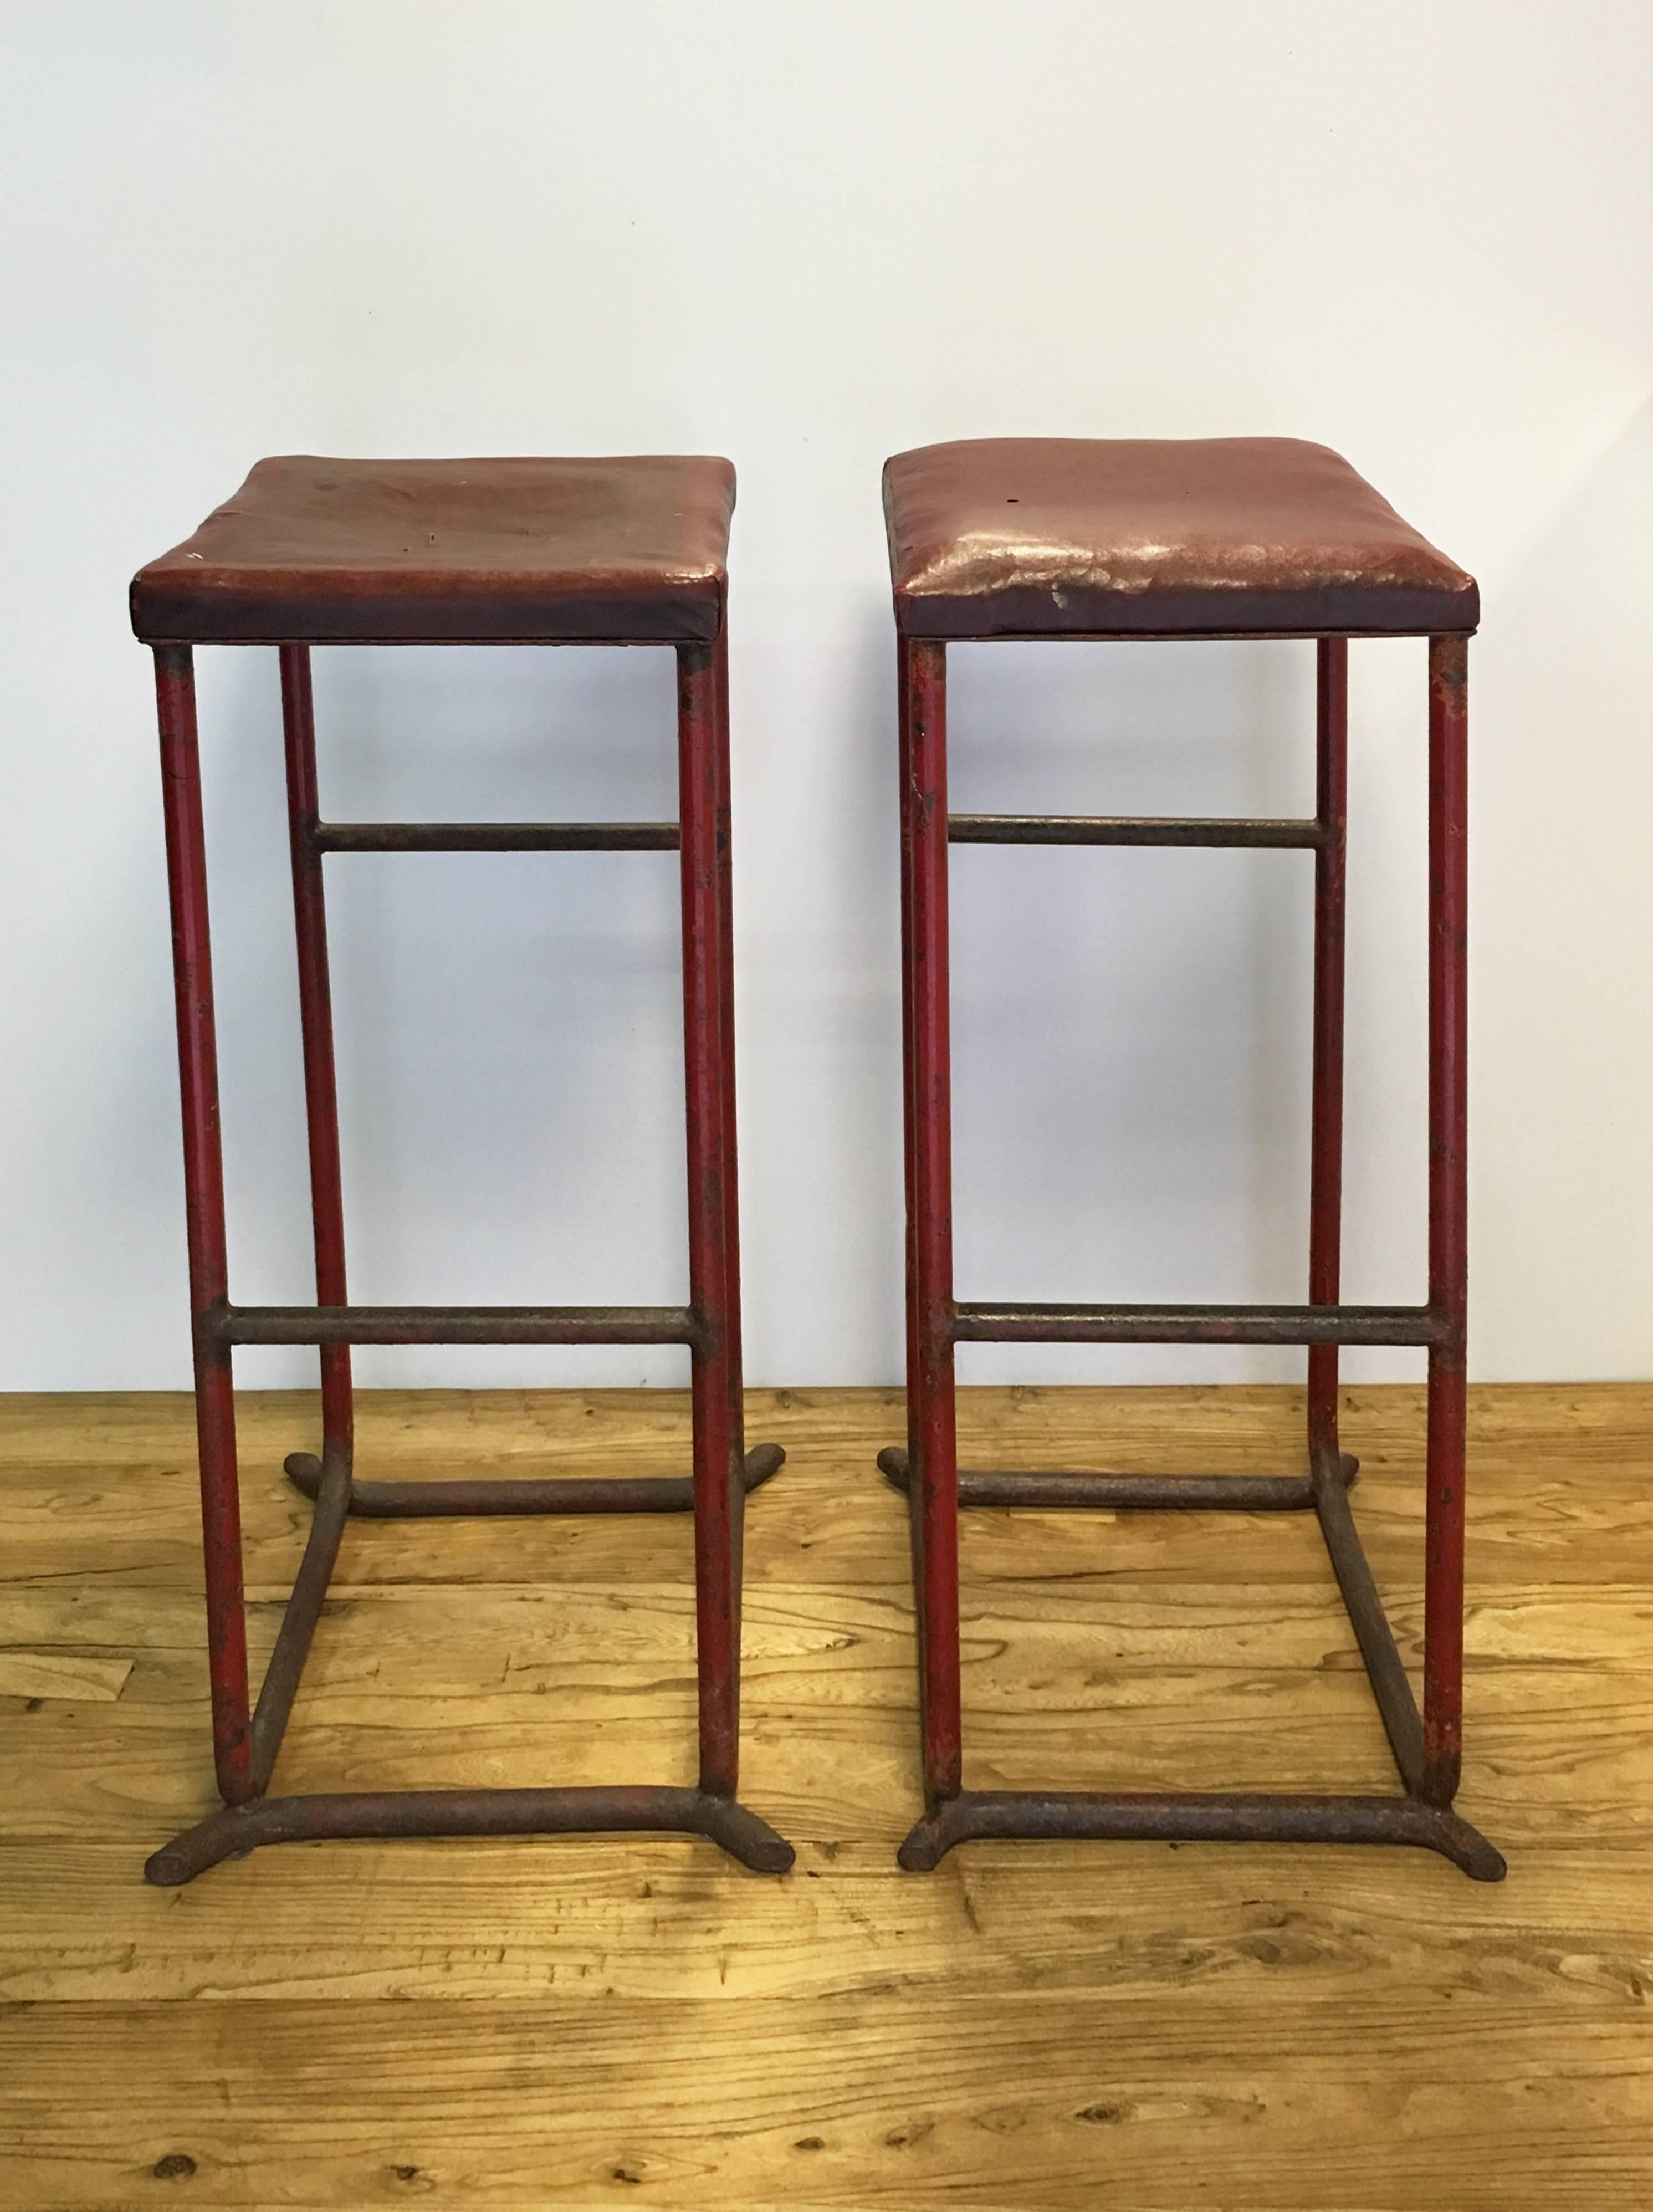 Vintage French Red Leather Stools, circa 1970s In Excellent Condition For Sale In Napa, CA